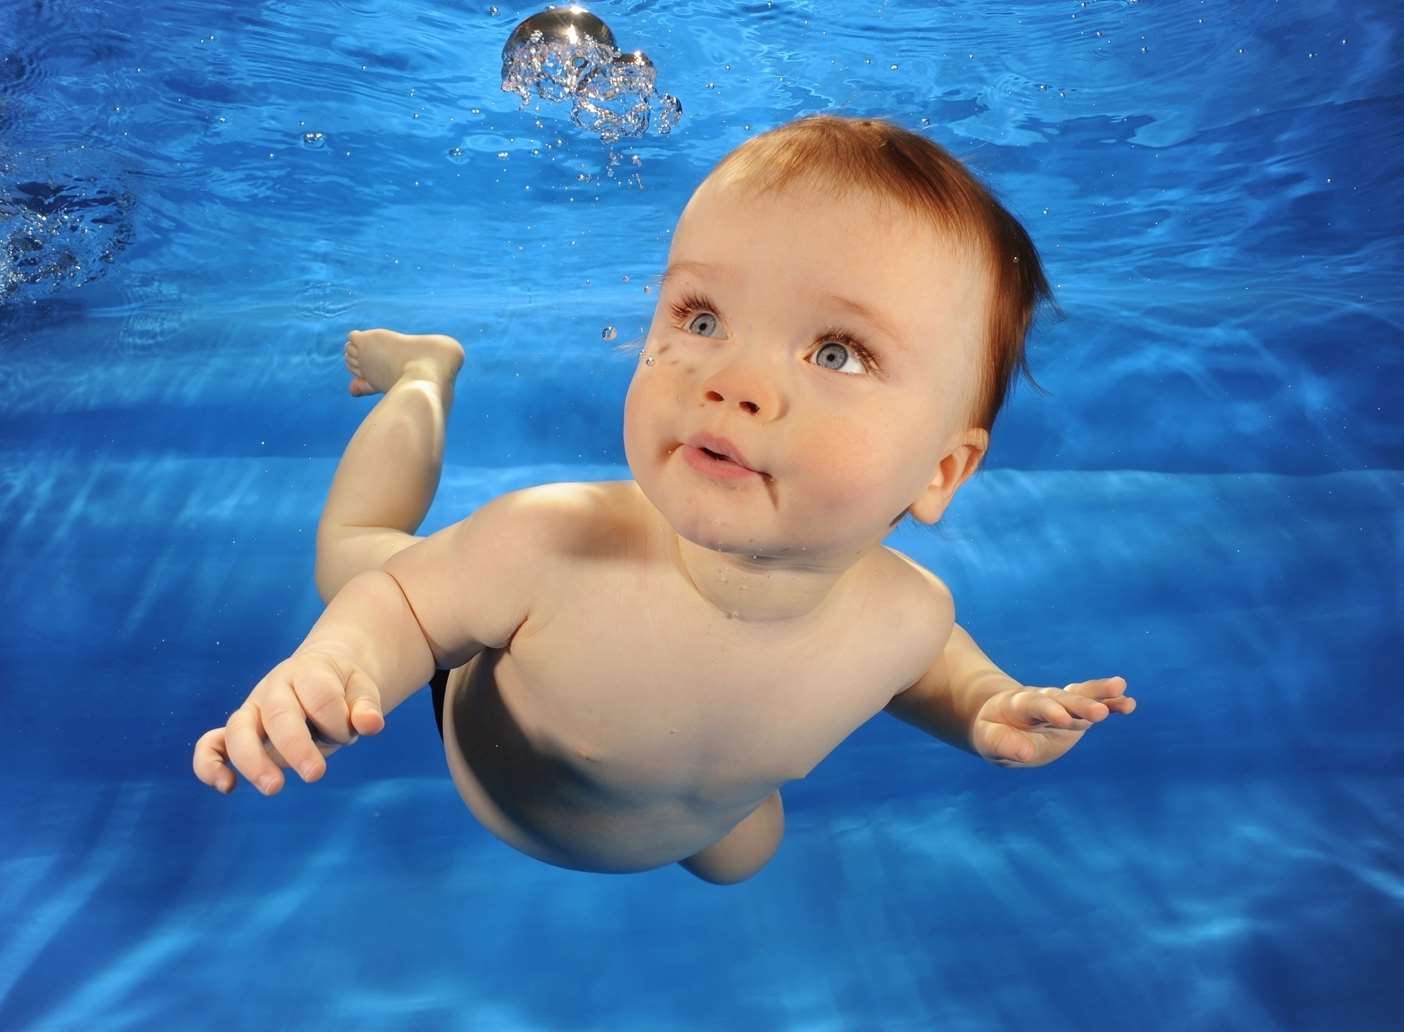 Water Babies classes are coming to Medway